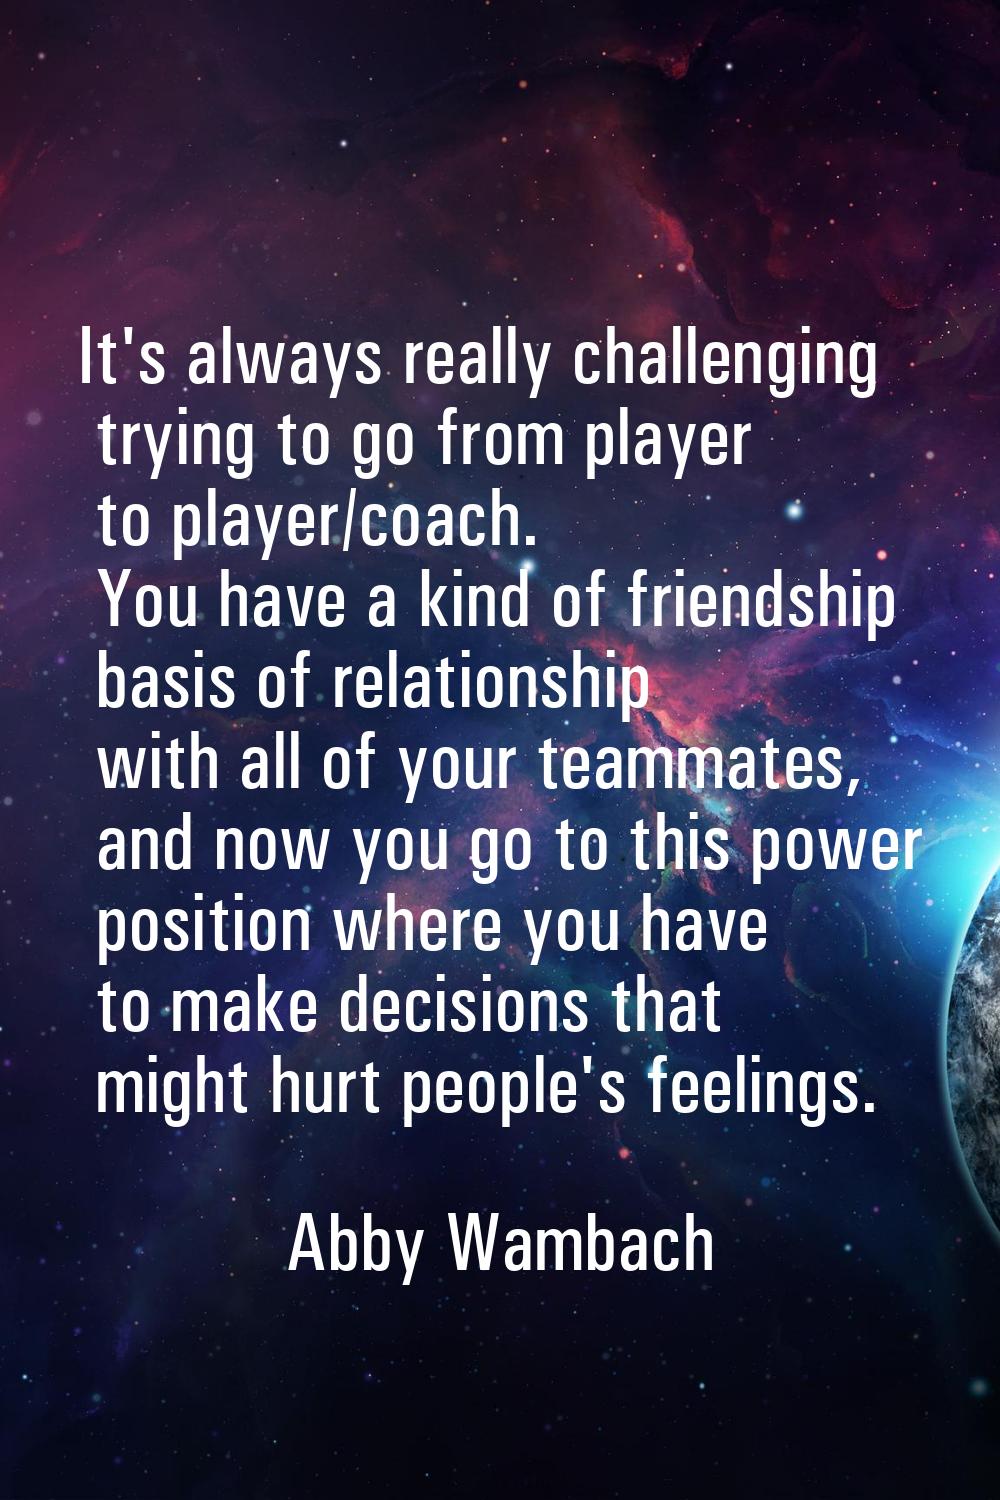 It's always really challenging trying to go from player to player/coach. You have a kind of friends